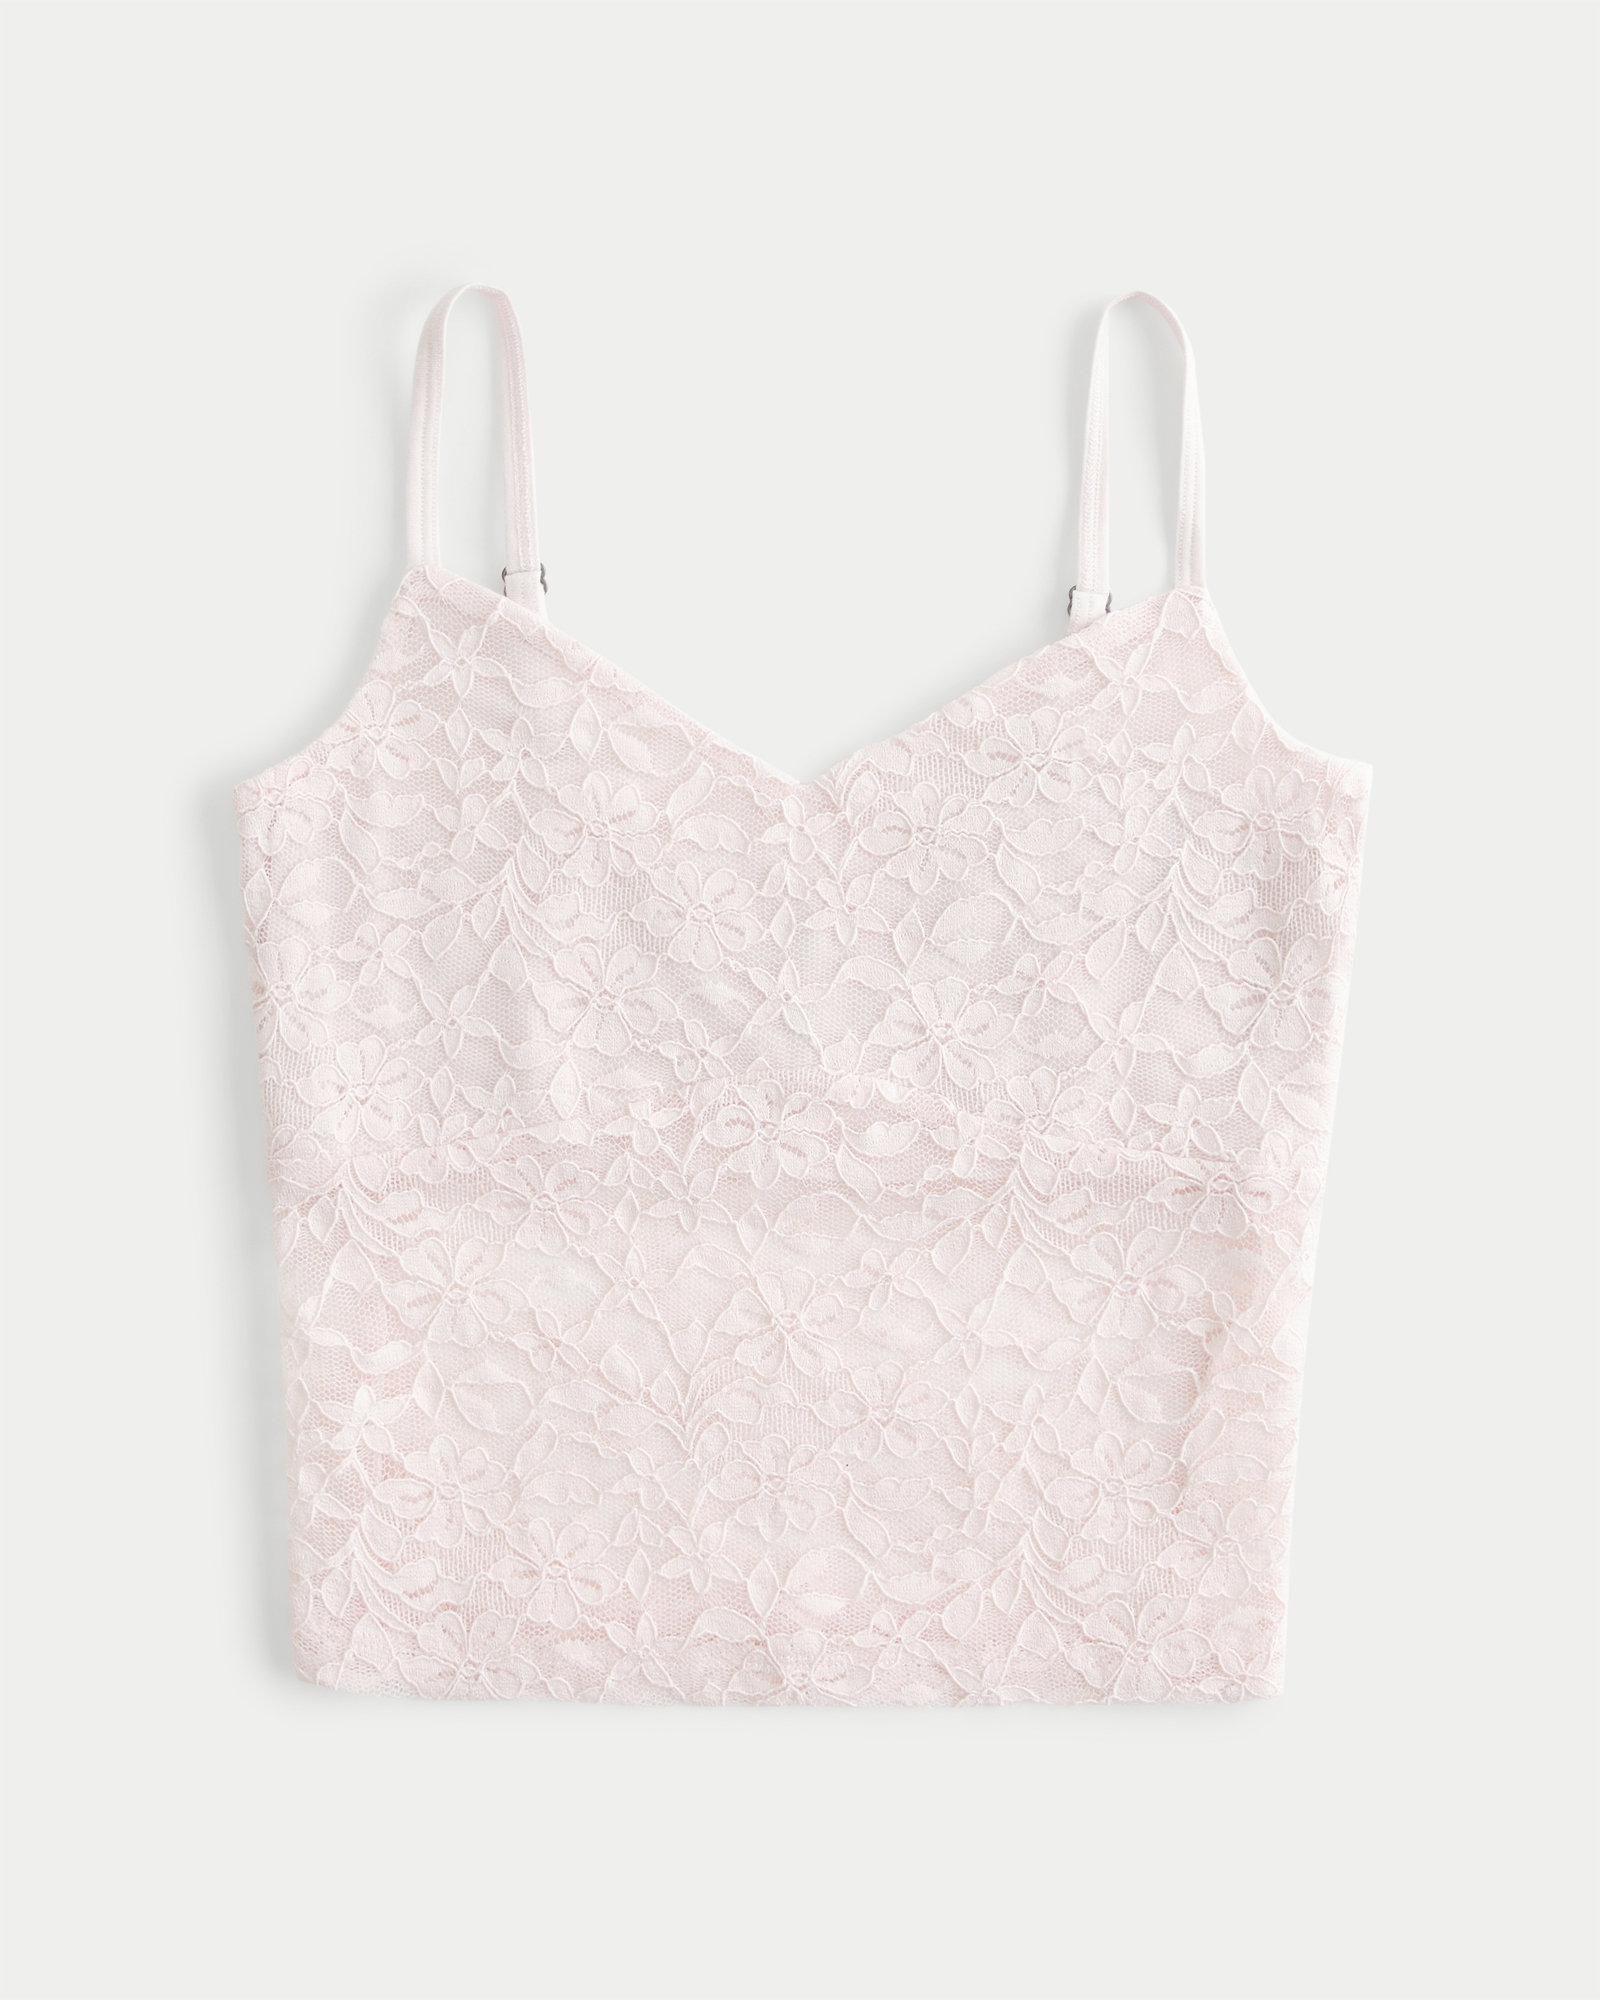 Womens Lace Trim Cami, Womens Clearance, Abercrombie.com